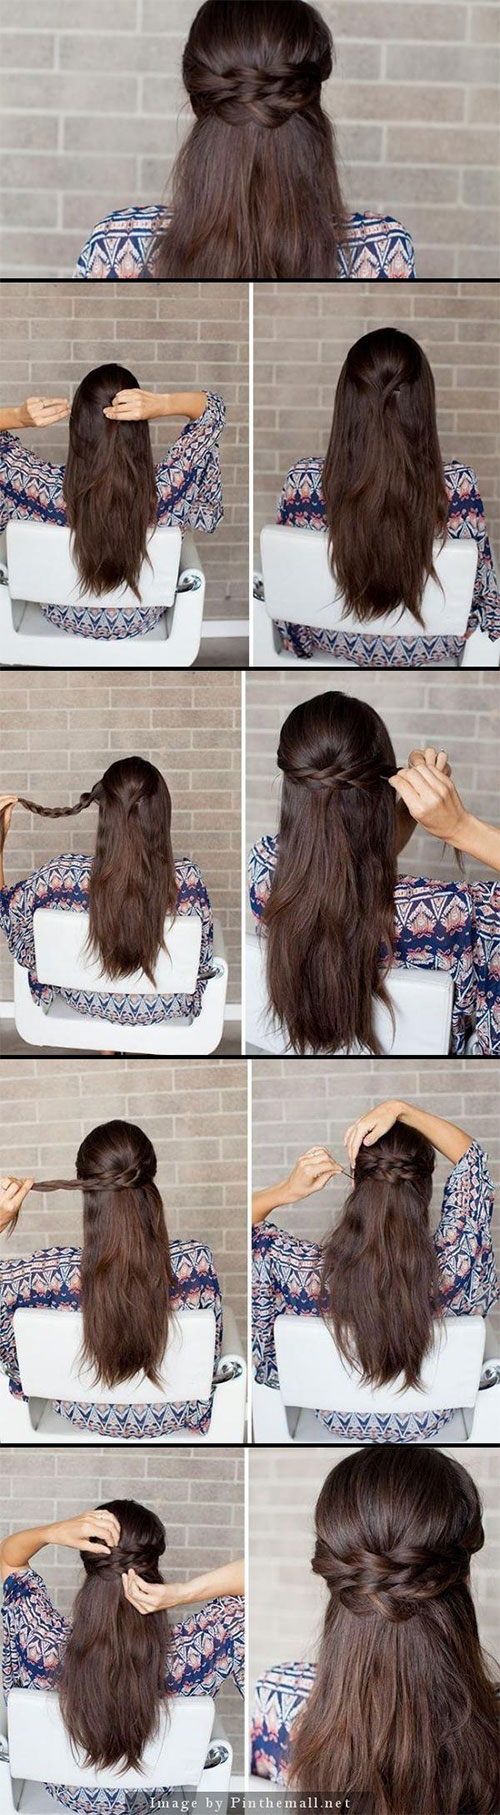 step by step hairstyle medium tail double braid